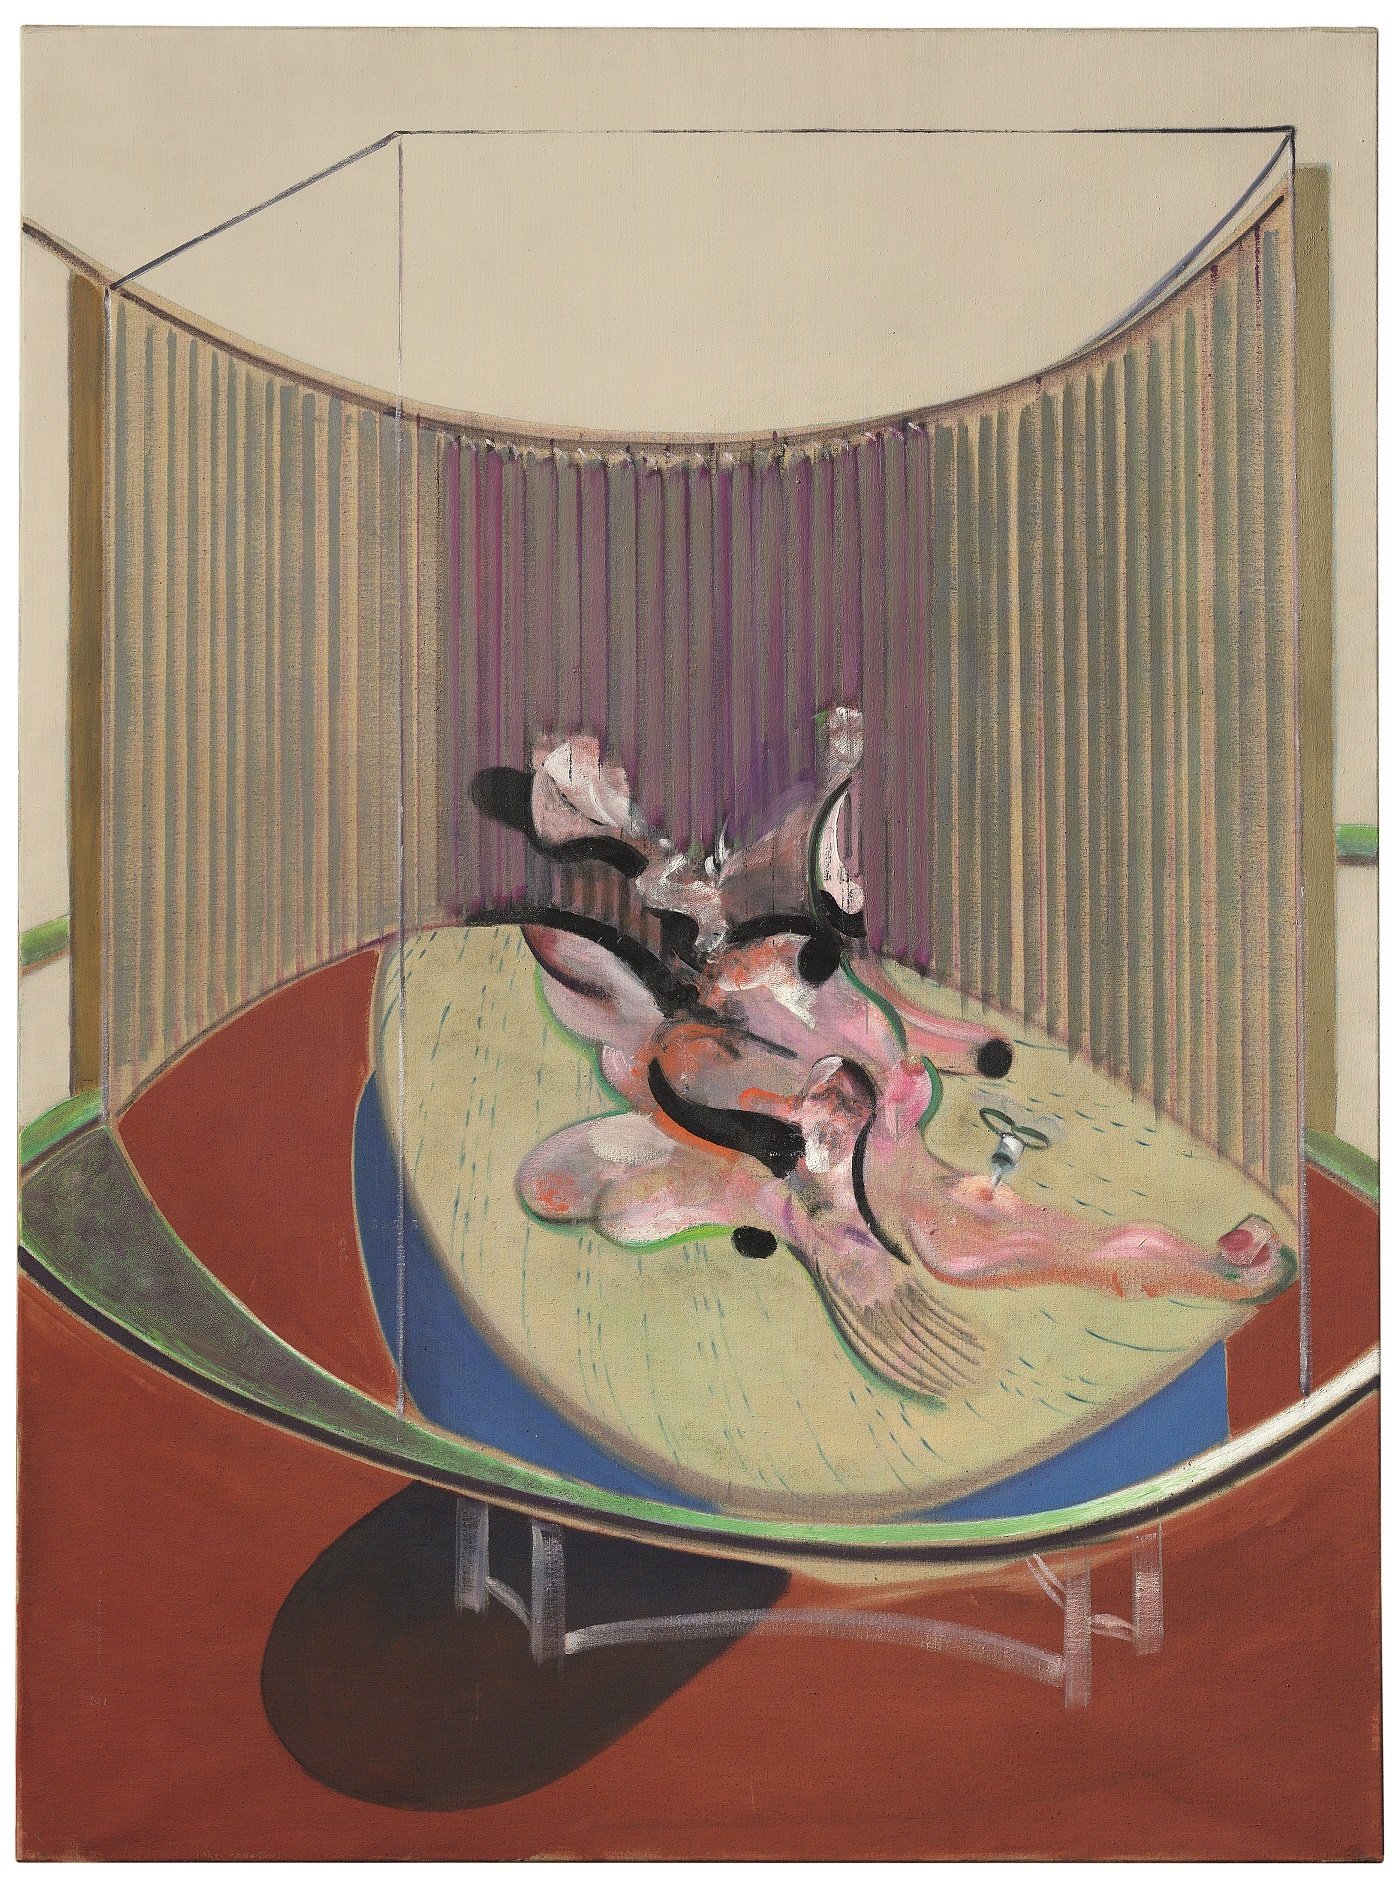 Francis Bacon, Version No. 2 of Lying Figure with Hypodermic Syringe, 1968. Courtesy Christie’s.